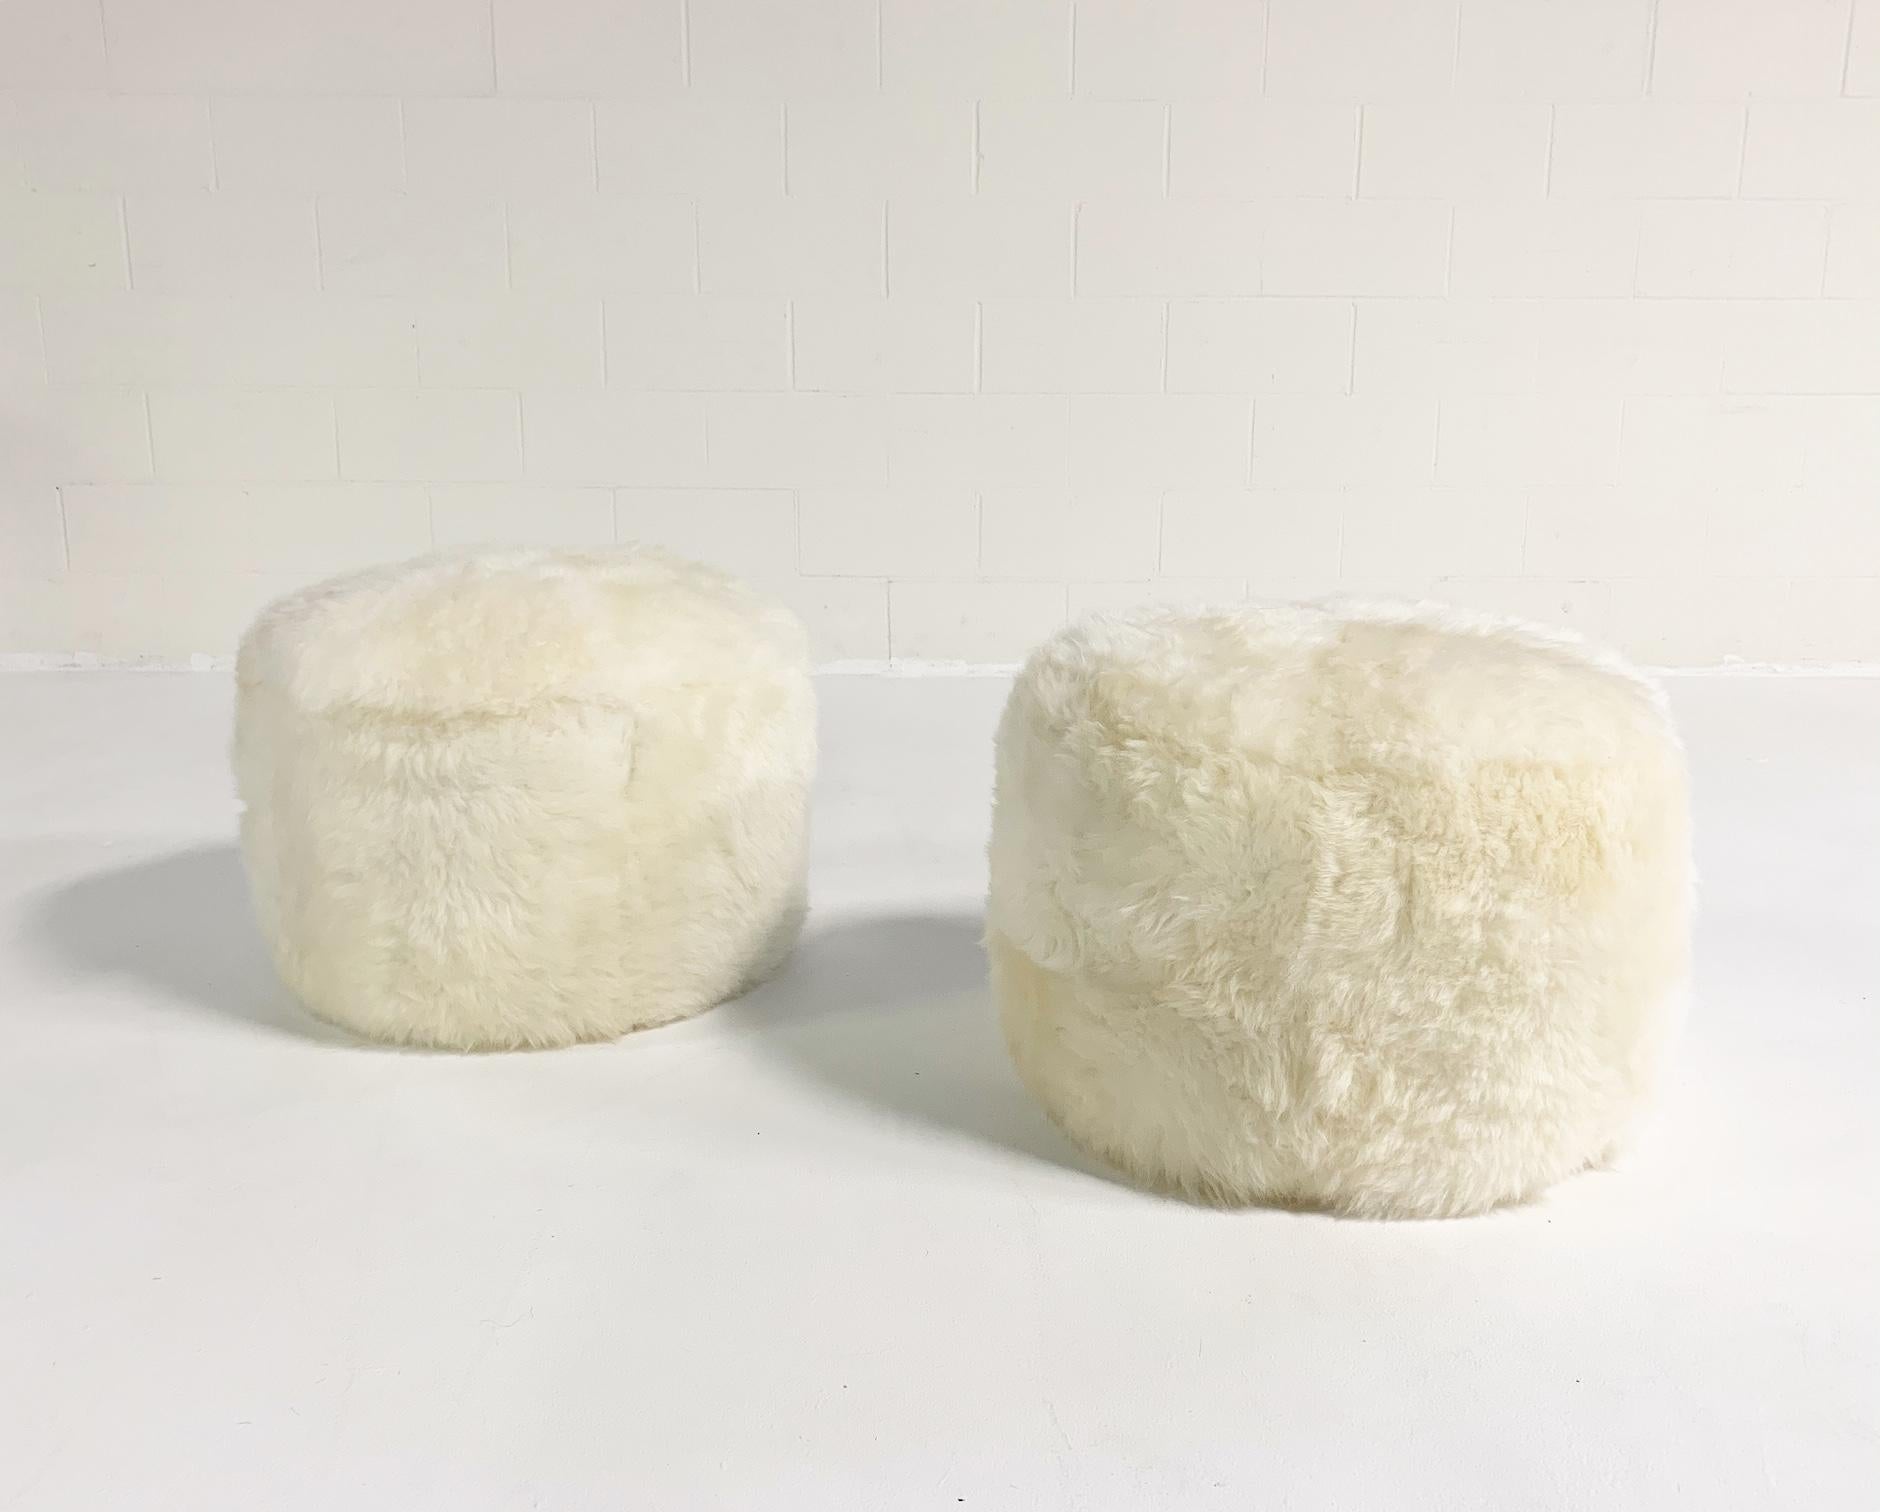 Part of the Forsyth signature collection. Our luxurious sheepskin pouf ottomans are handcrafted from our beautiful Brazilian sheepskins. The most beautiful sheepskins are selected, hand cut, hand stitched, and hand stuffed. Down feathers fill each